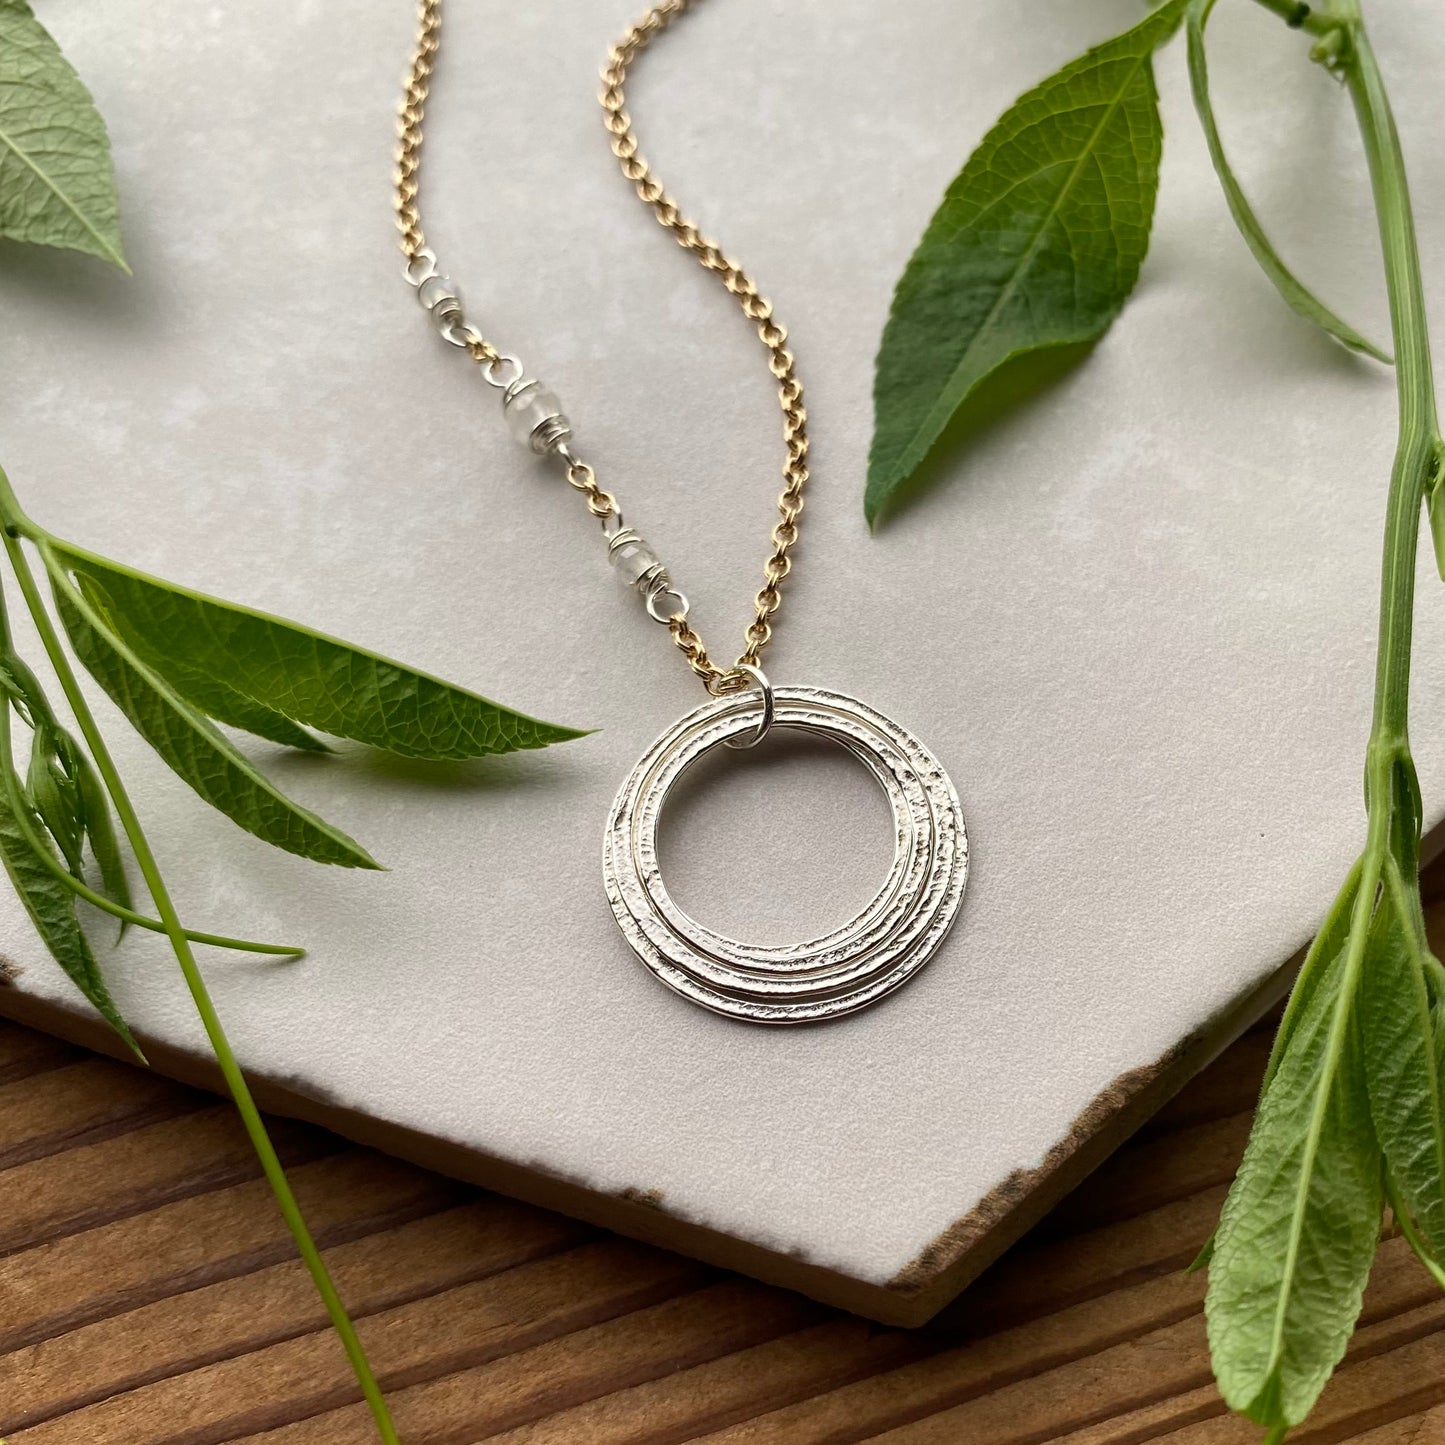 Elegant 50th Birthday Necklace, Handmade Sterling Silver 5 Circles Pendant on 14K Gold Fill Chain